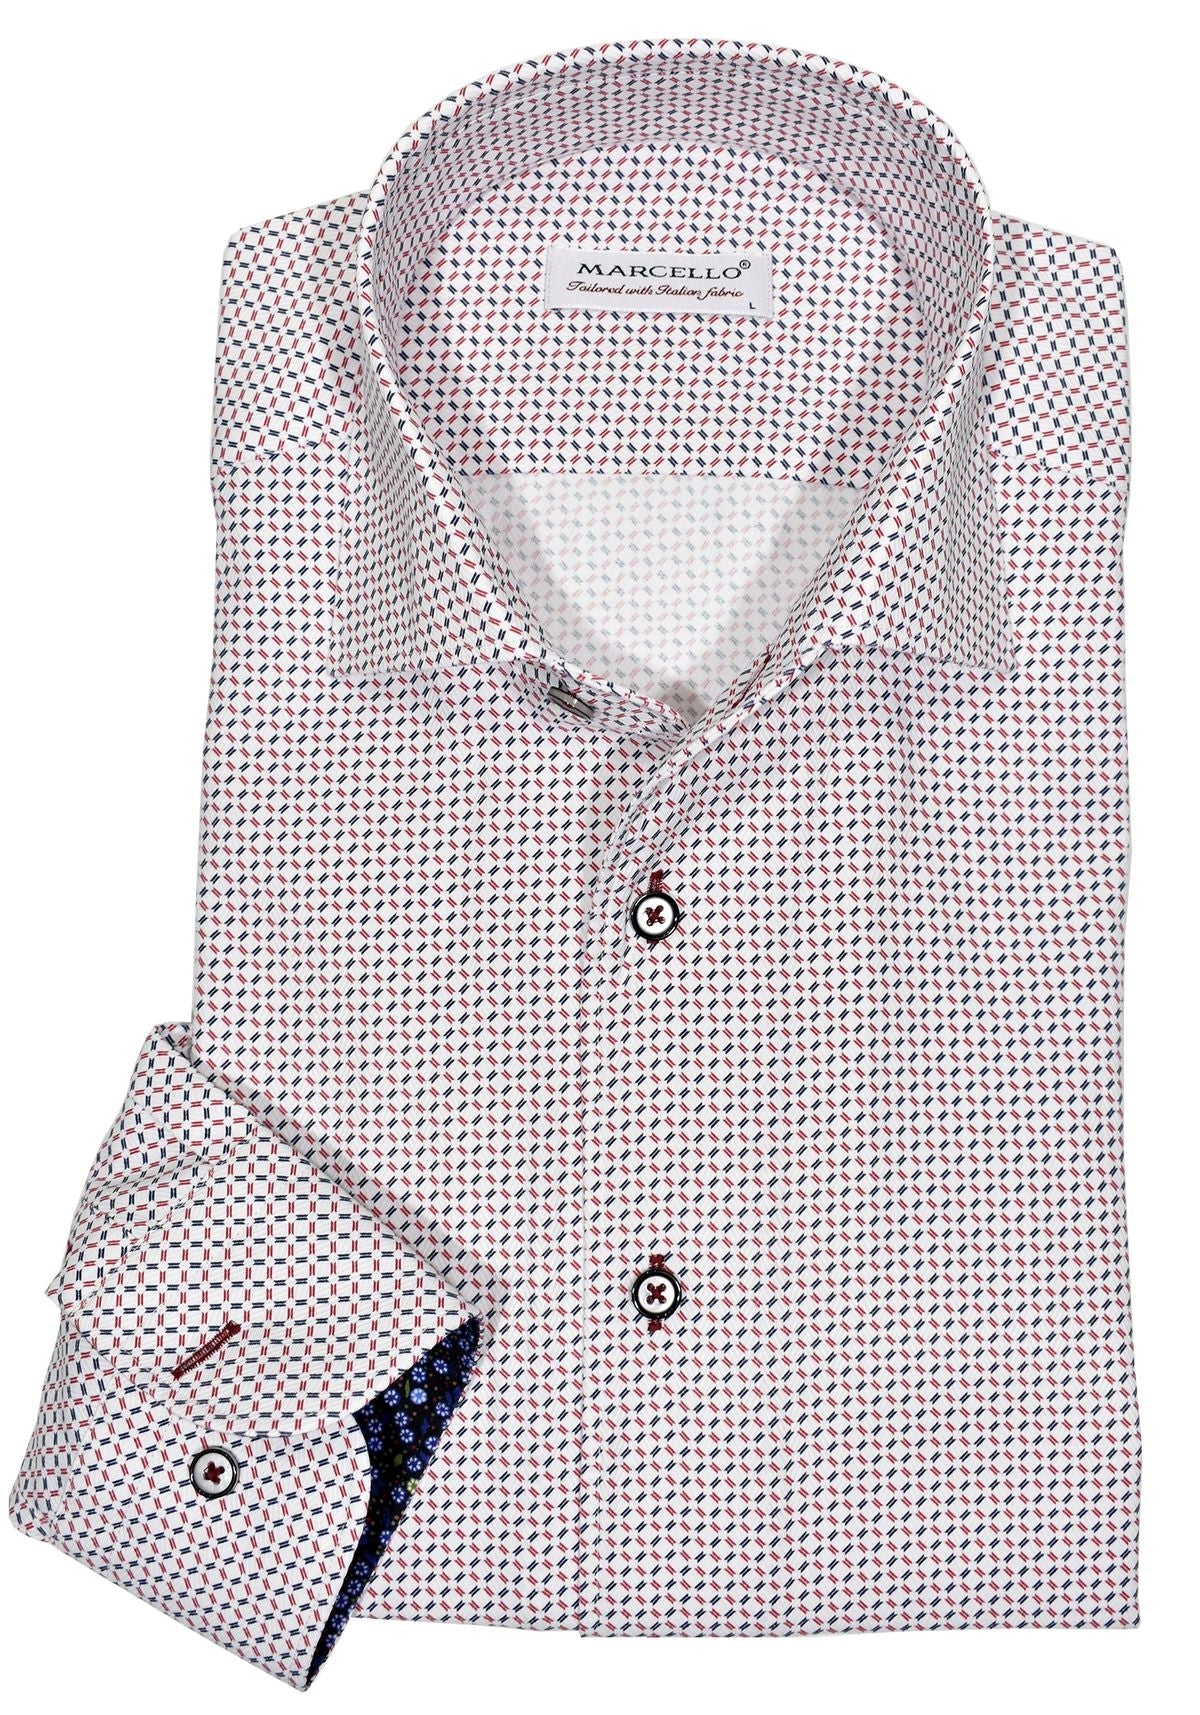 Exclusive Marcello 1 Piece Roll Collar Shirt.  The one piece roll collar stands perfectly and looks fantastic alone or under a sport coat.  The fashion red and black open fine diamond pattern coupled with a rich tonal herringbone fabric creates a sophisticated look to set your apart from the rest.  Hand selected buttons, two button cuff placket for the best look when rolling up the cuffs and enhanced stitch detailing.  Classic shaped fit.